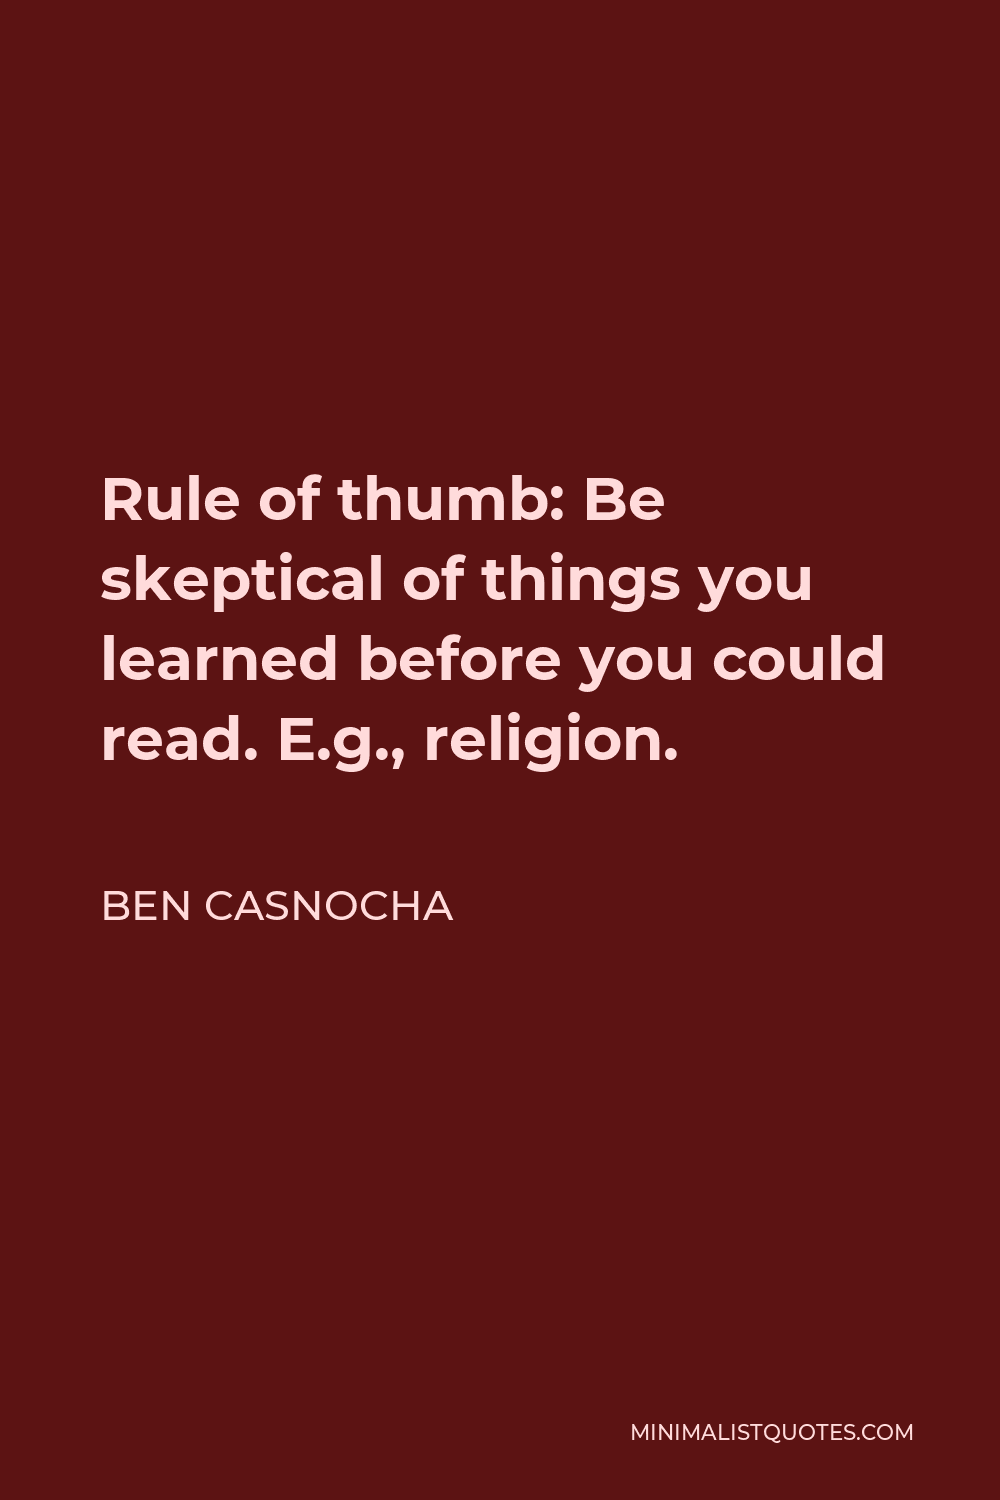 Ben Casnocha Quote - Rule of thumb: Be skeptical of things you learned before you could read. E.g., religion.